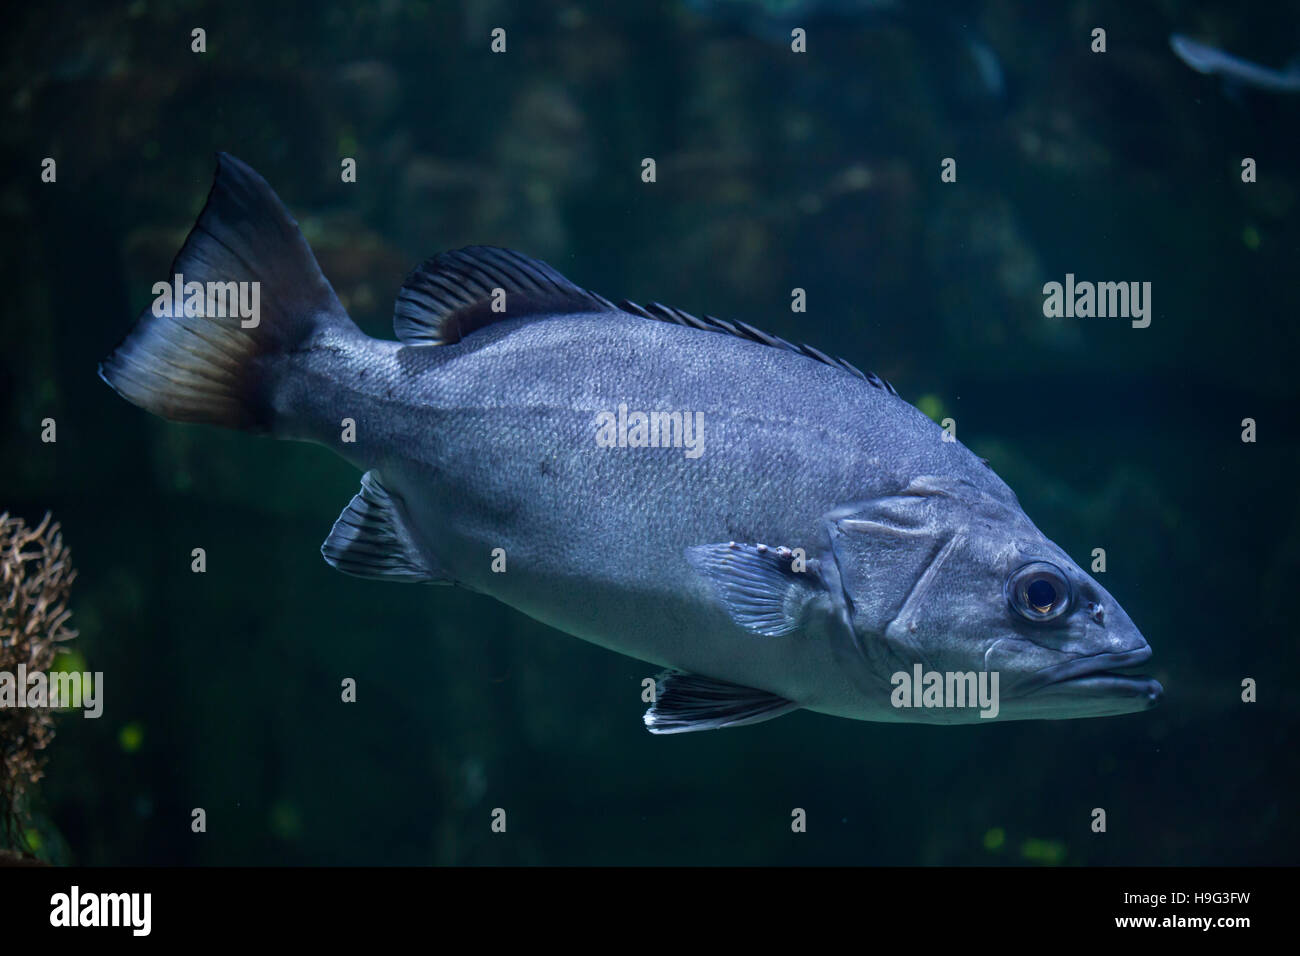 Atlantic wreckfish (Polyprion americanus), also known as the stone bass. Stock Photo